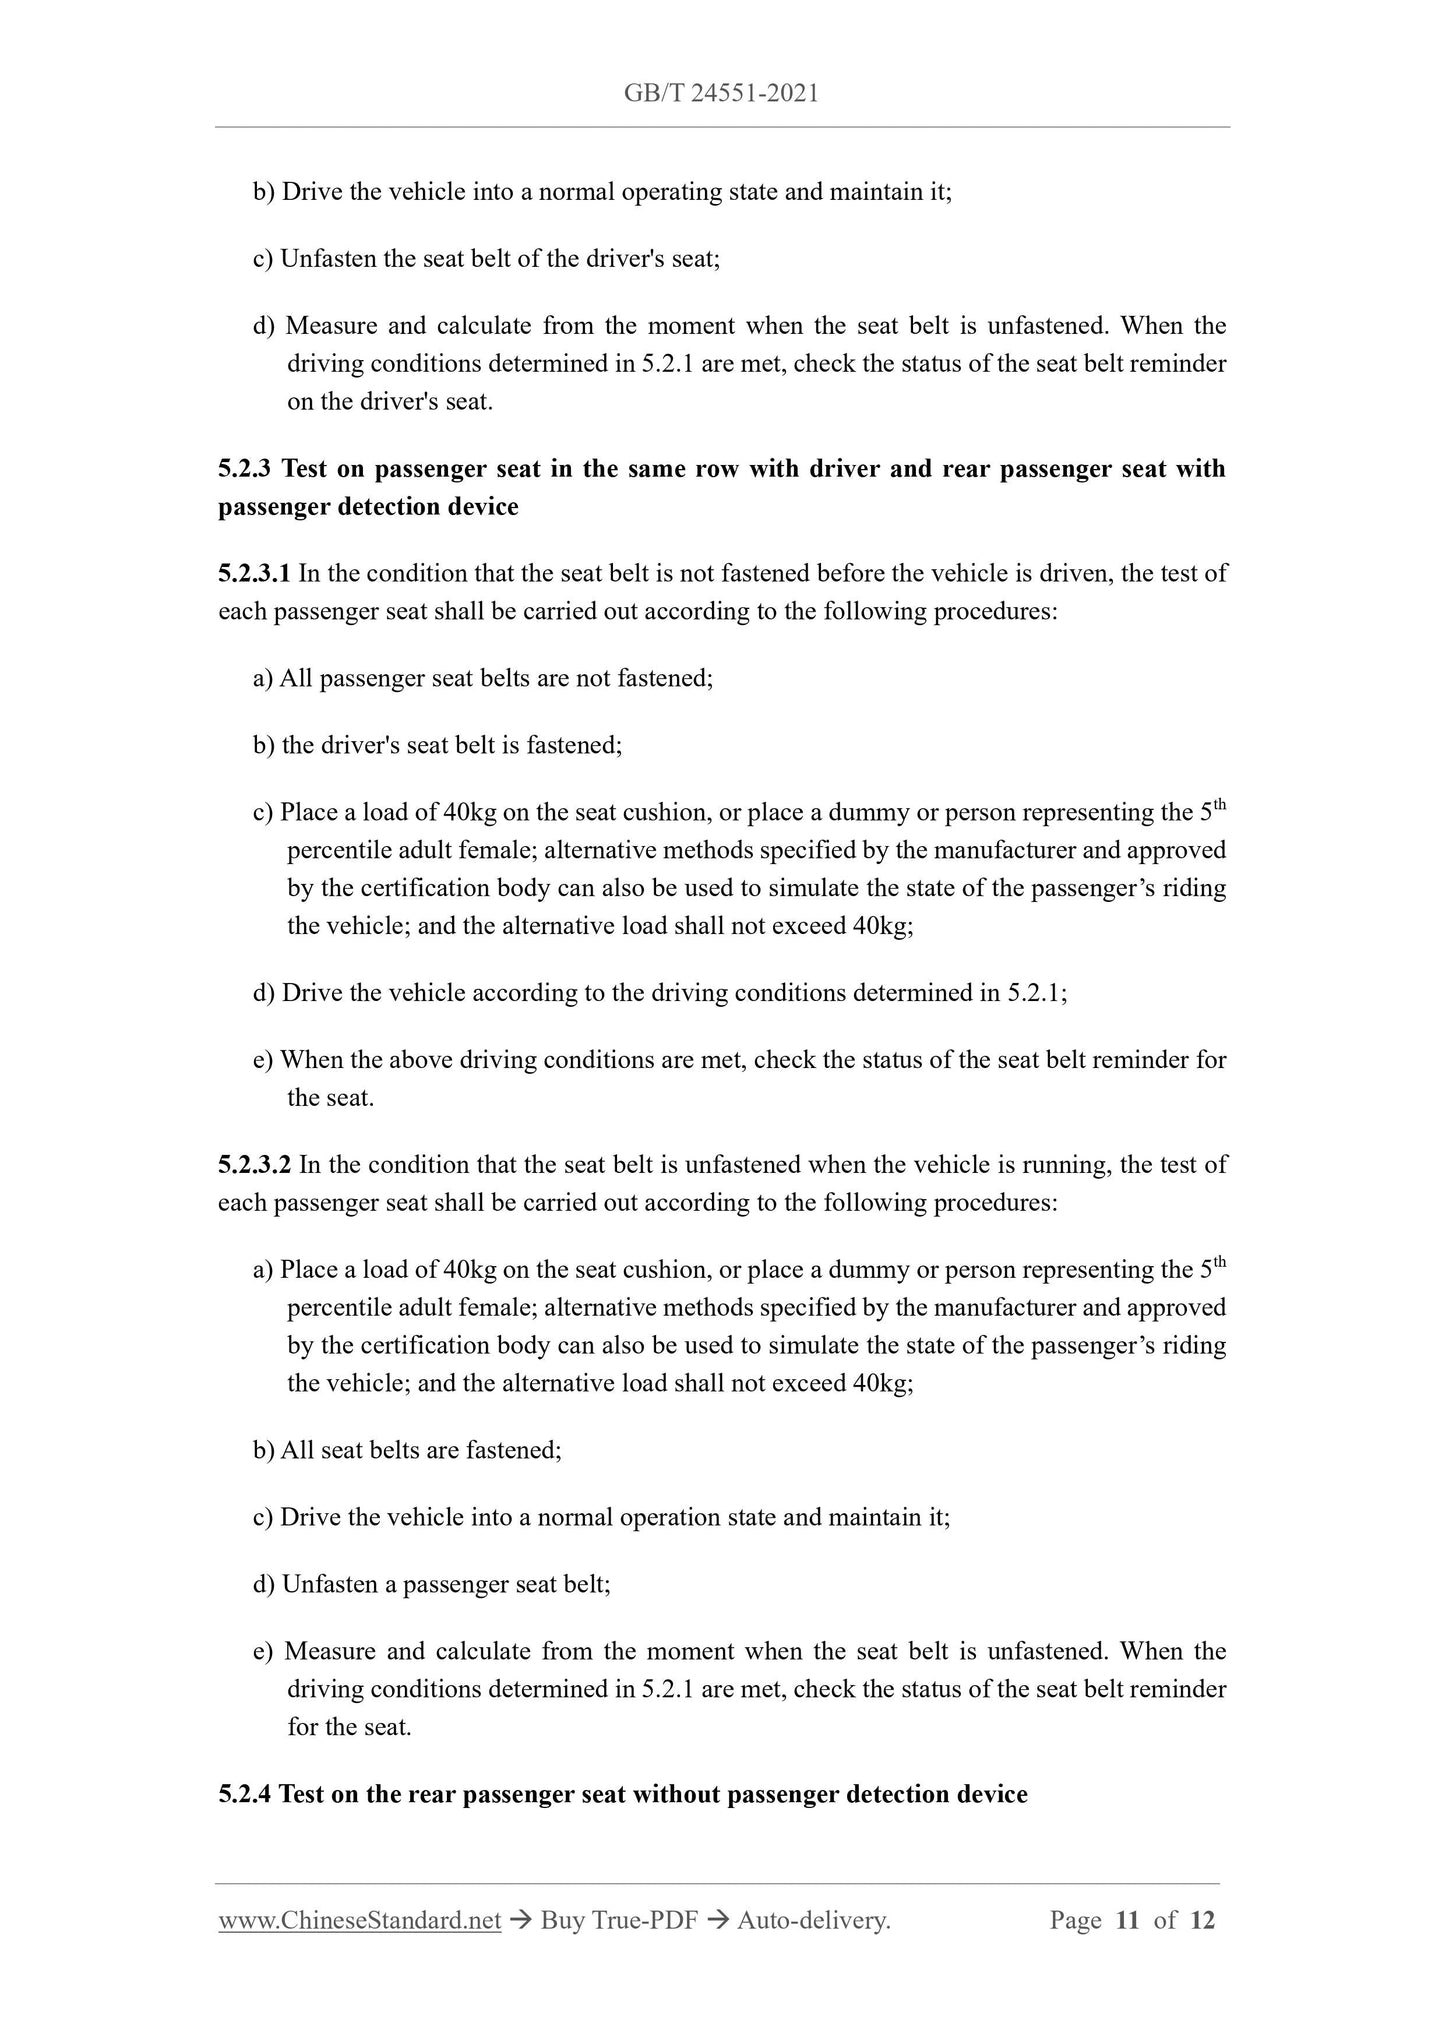 GB/T 24551-2021 Page 6